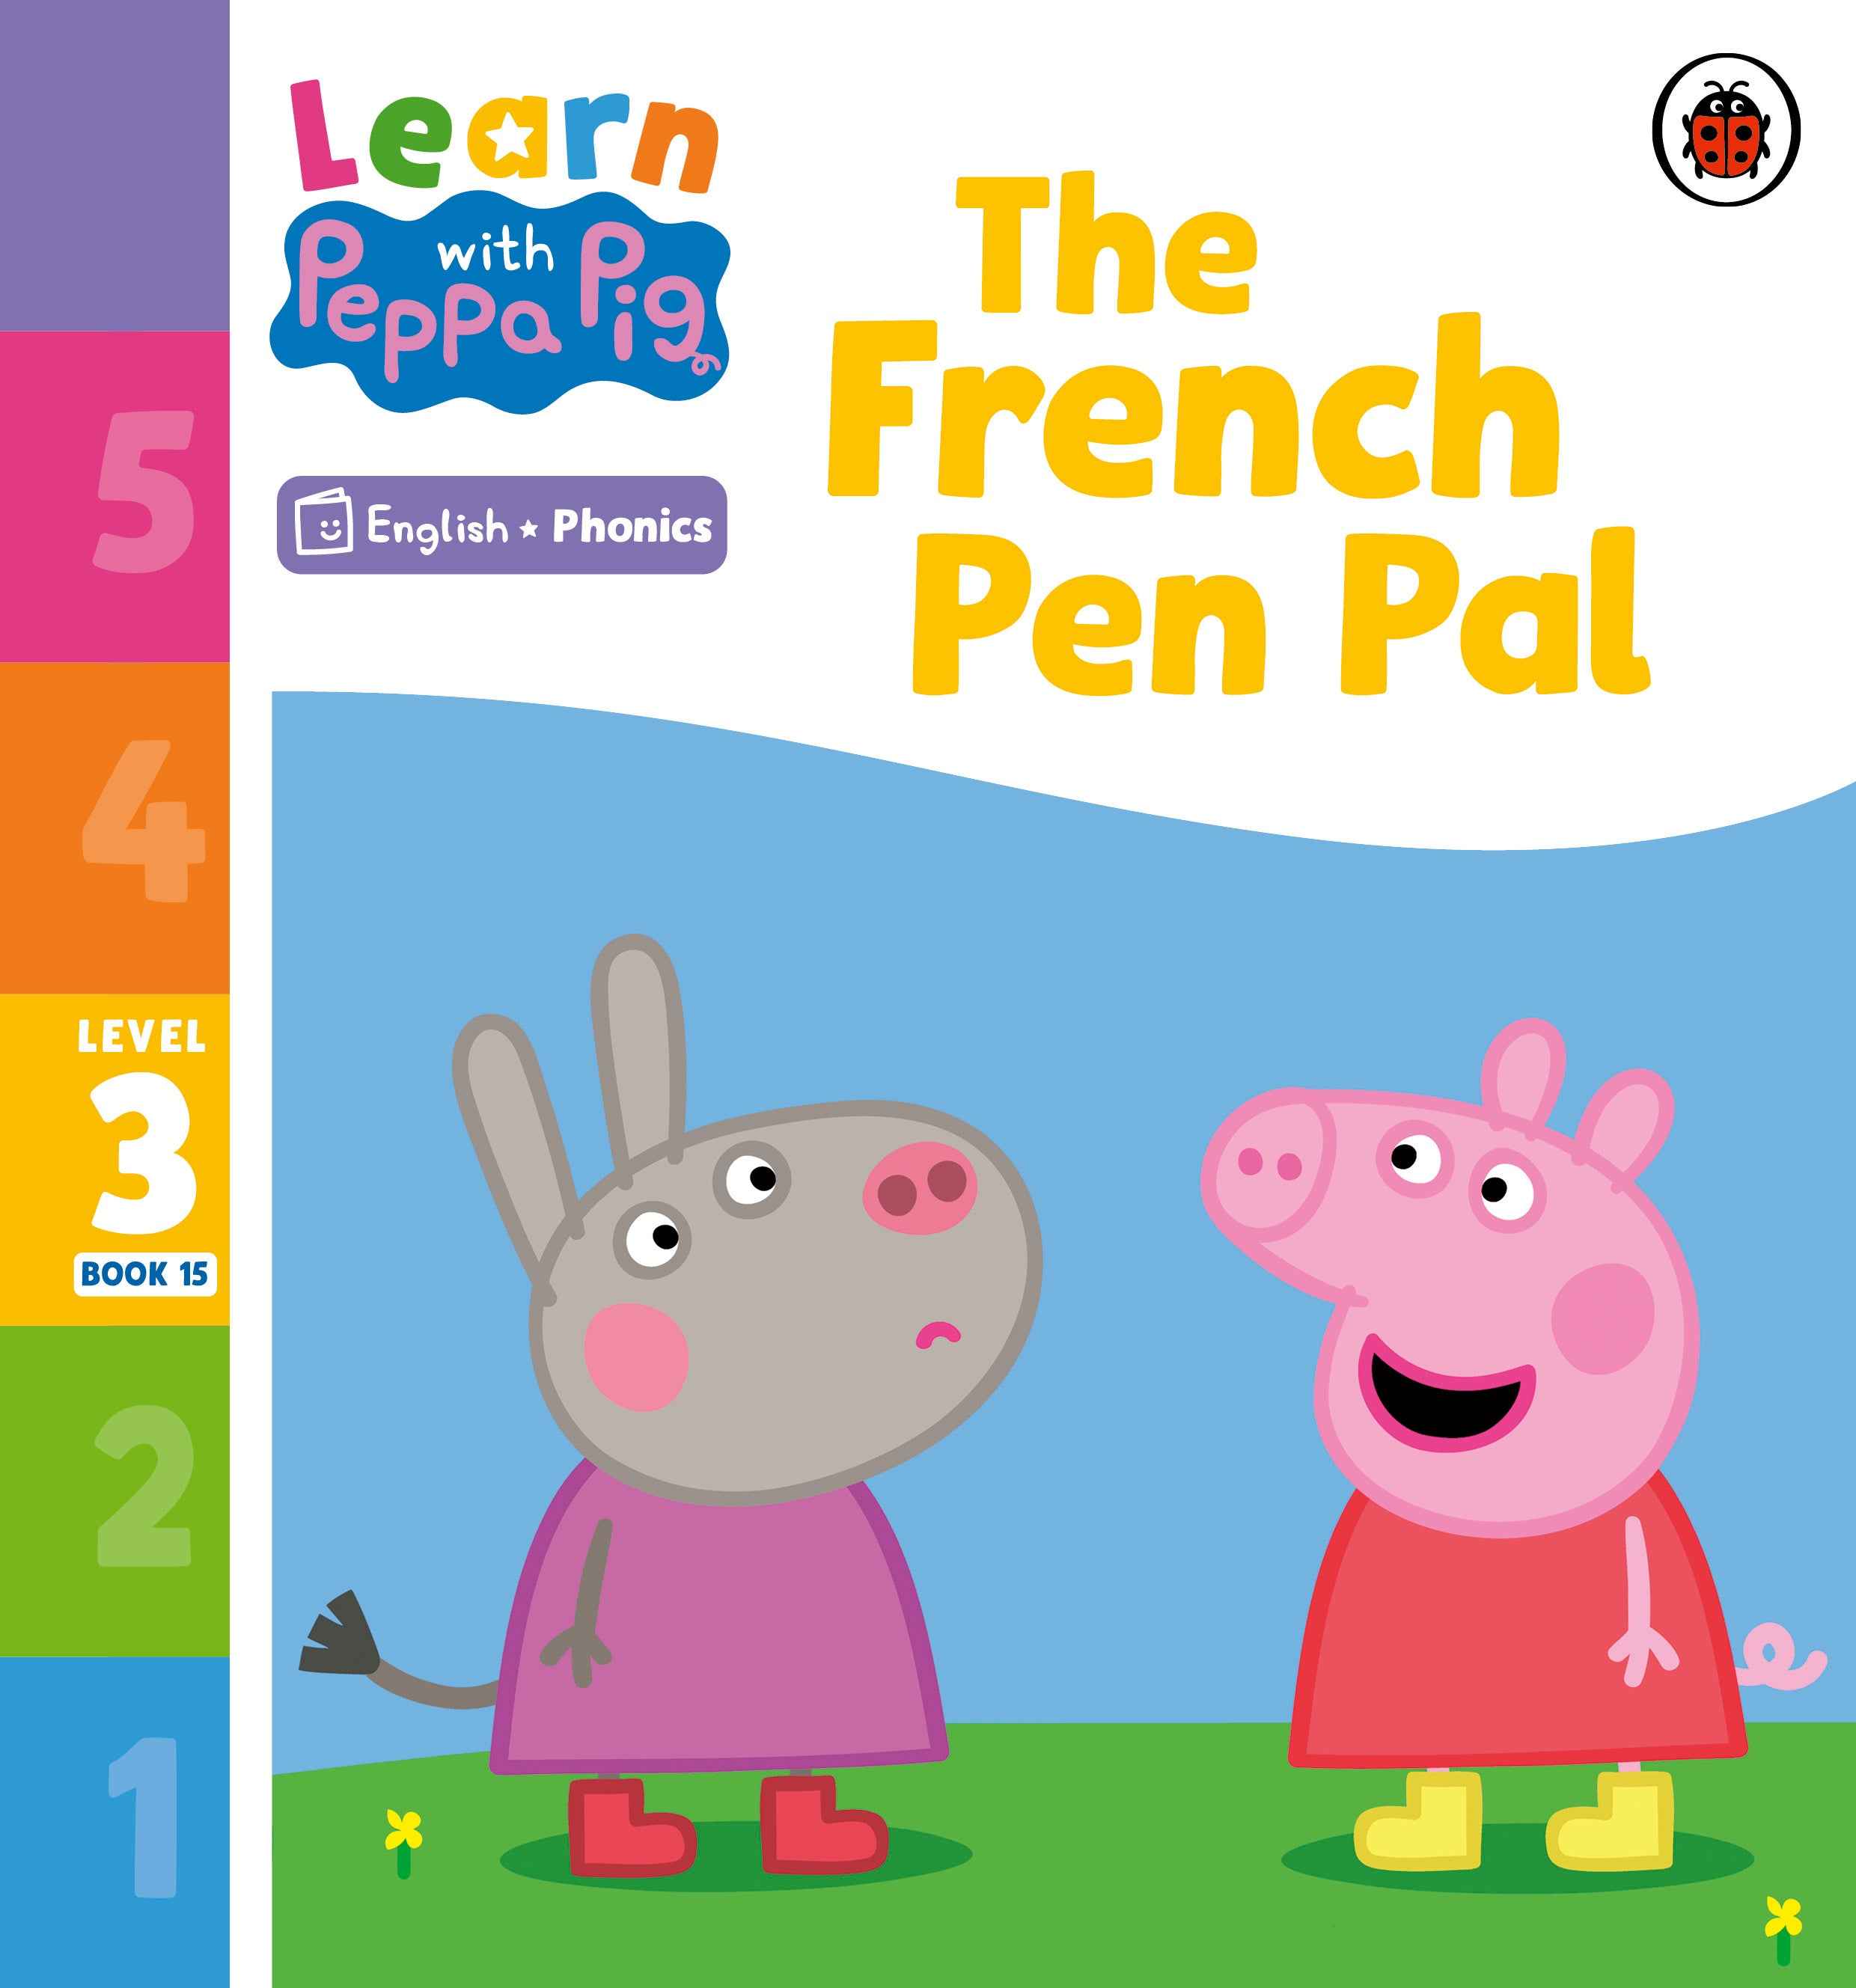 The French Pen Pal